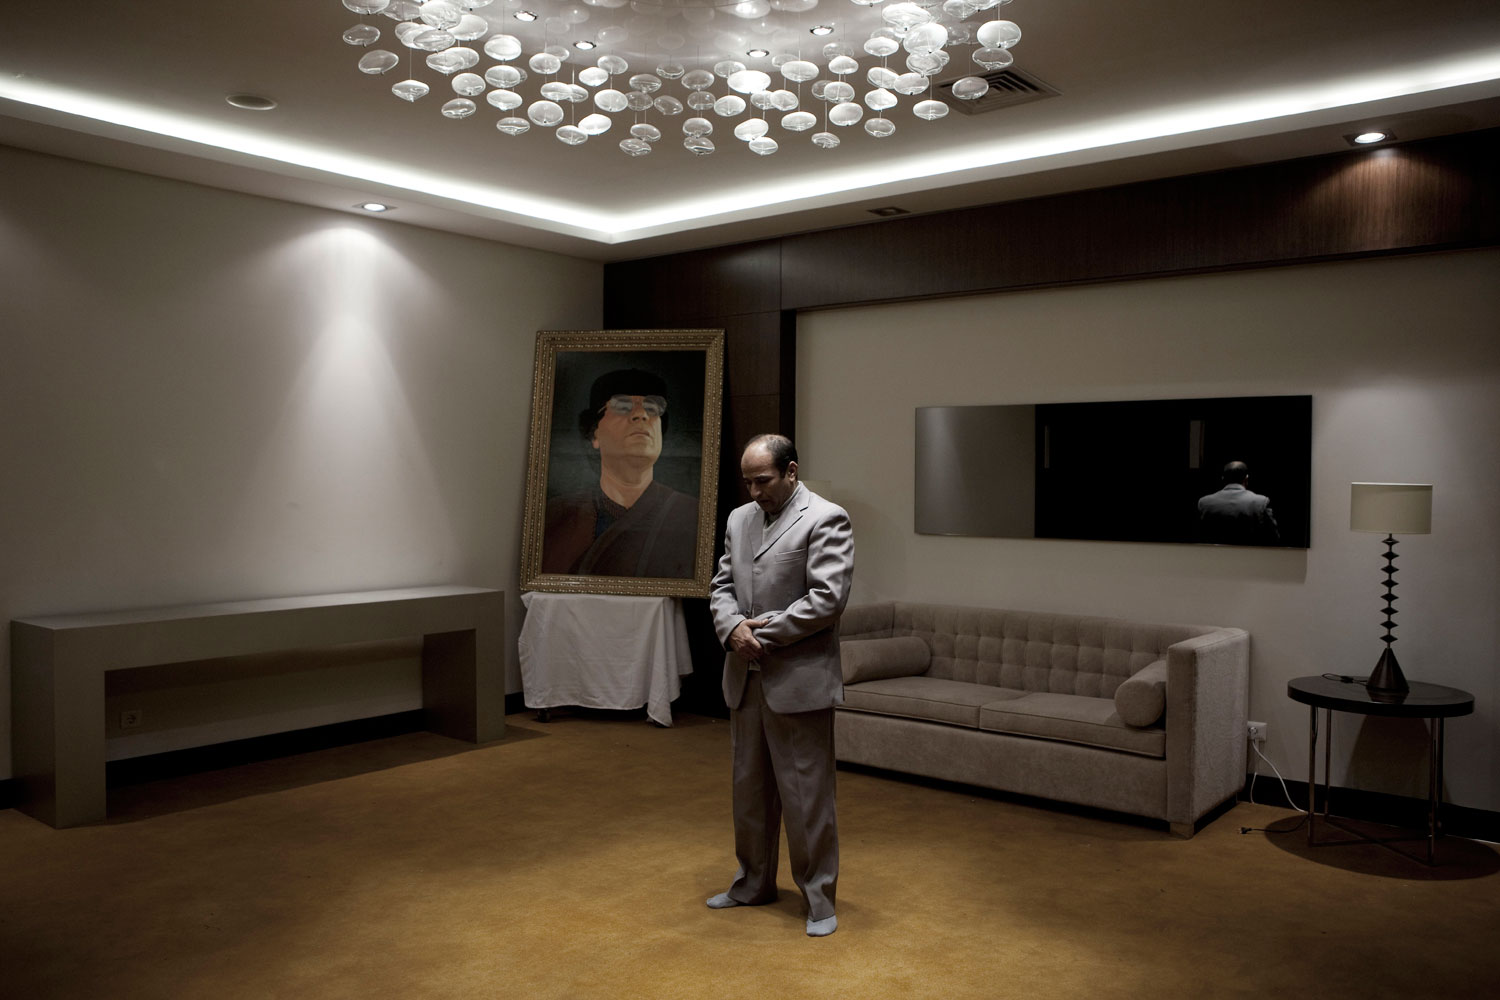 March 14, 2011. A man performs his evening prayers next to a portrait of Libyan leader Muammar Gaddafi, in the lobby of a hotel in which a press conference by tribal leaders was taking place in Tripoli.